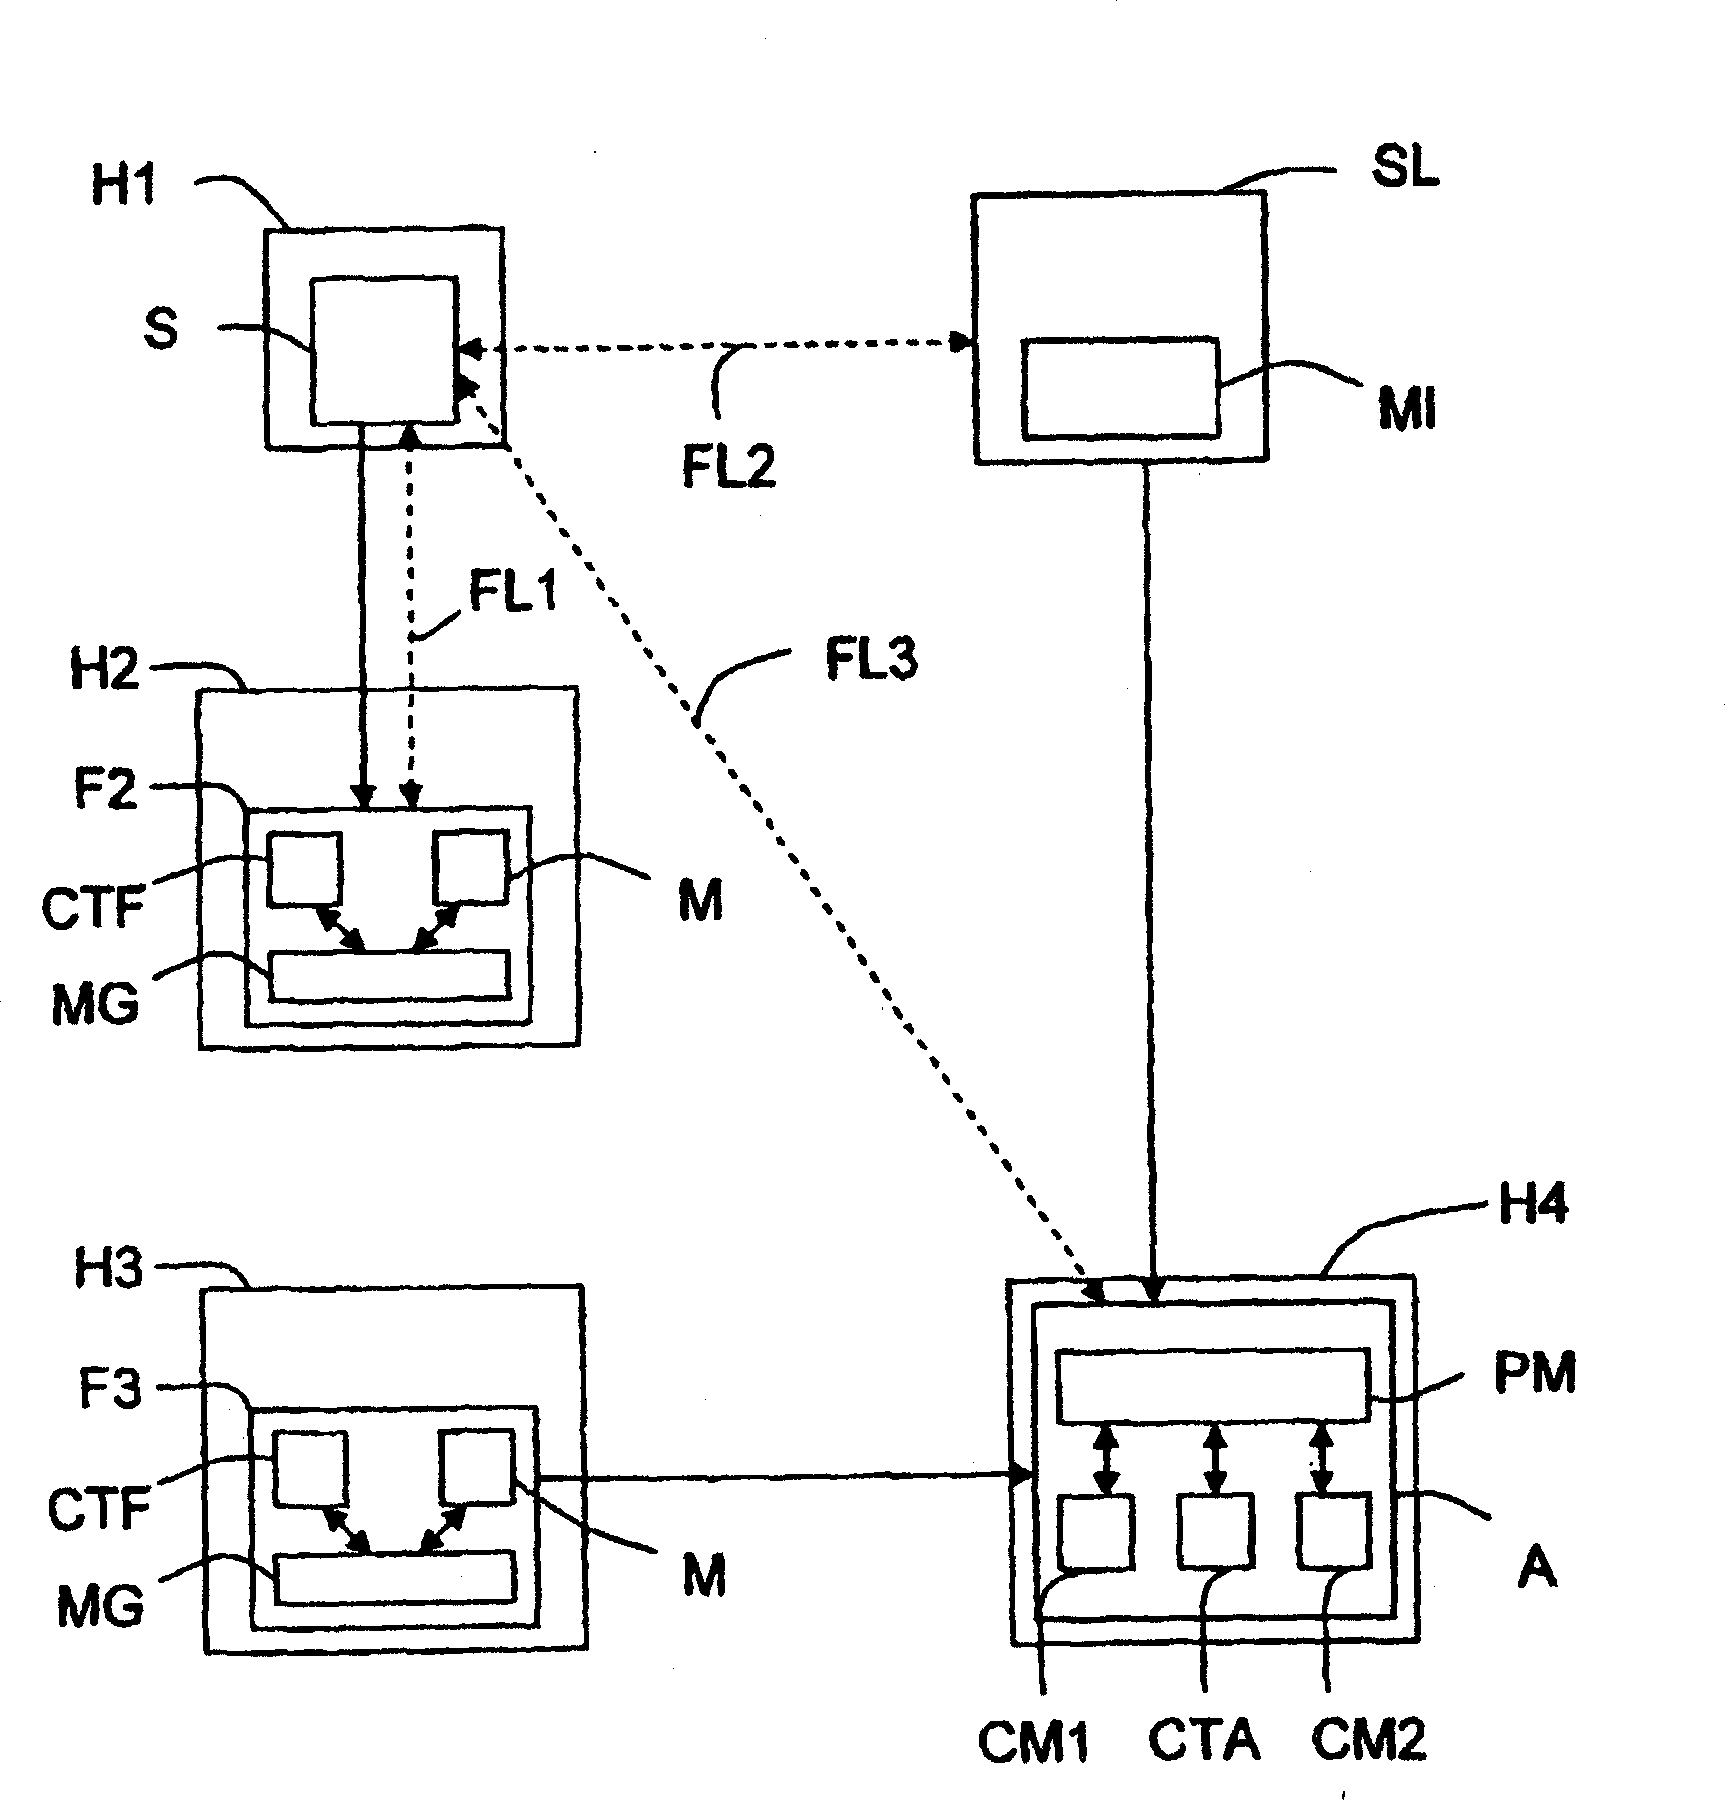 Method of locating mobile communicating objects within a communications network